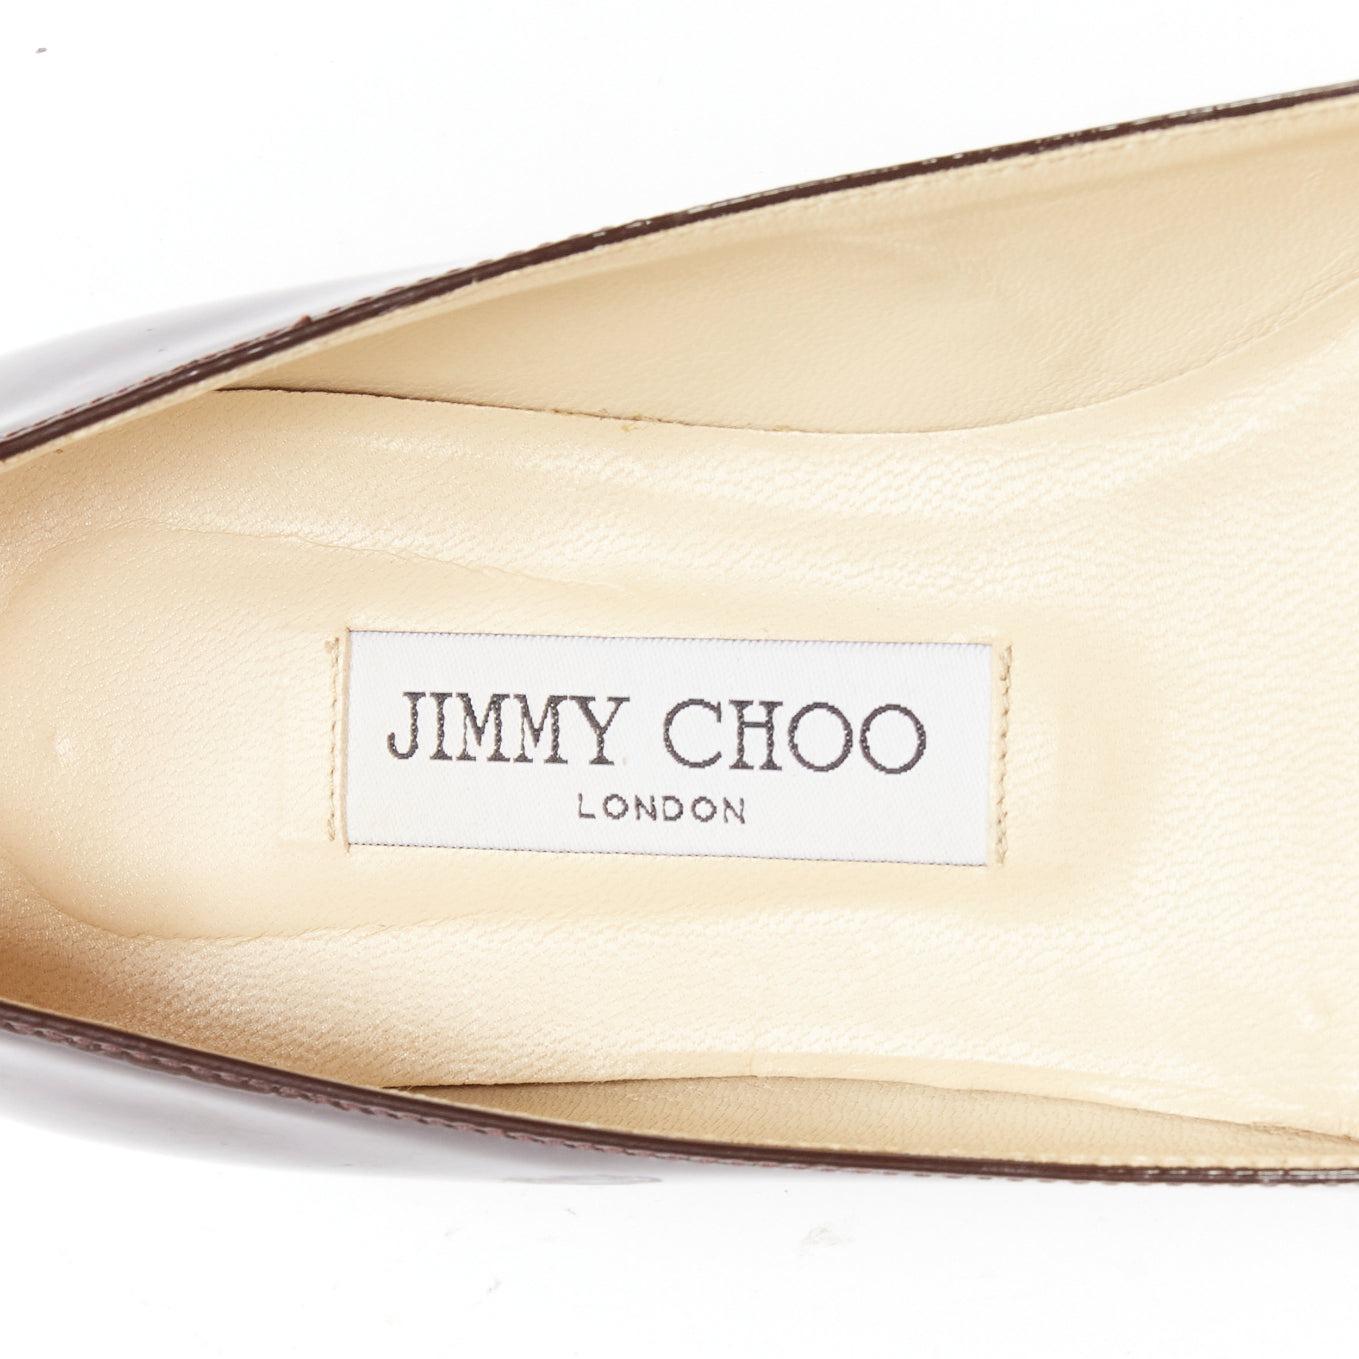 JIMMY CHOO brown patent leather pointed toe simple flats EU37.5 4